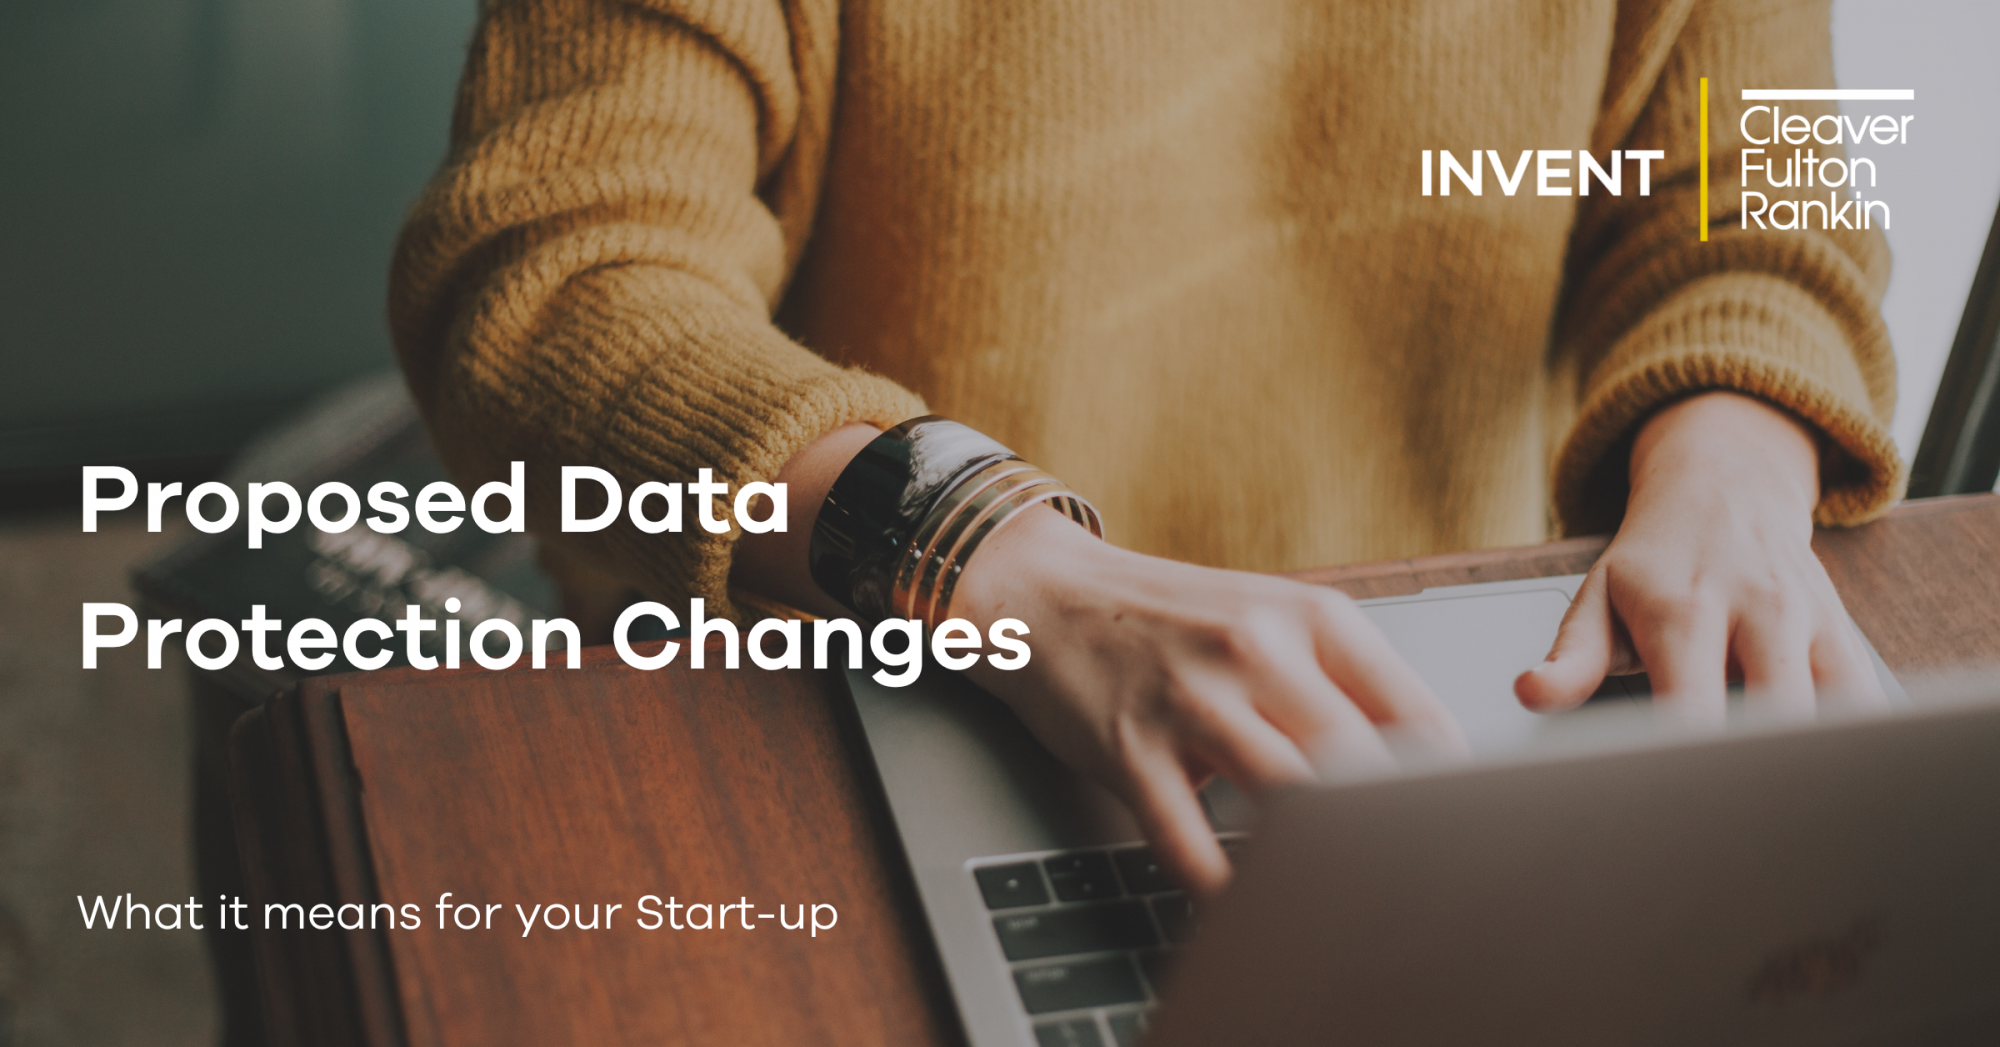 Proposed Data Protection Changes: What it means for your start-up